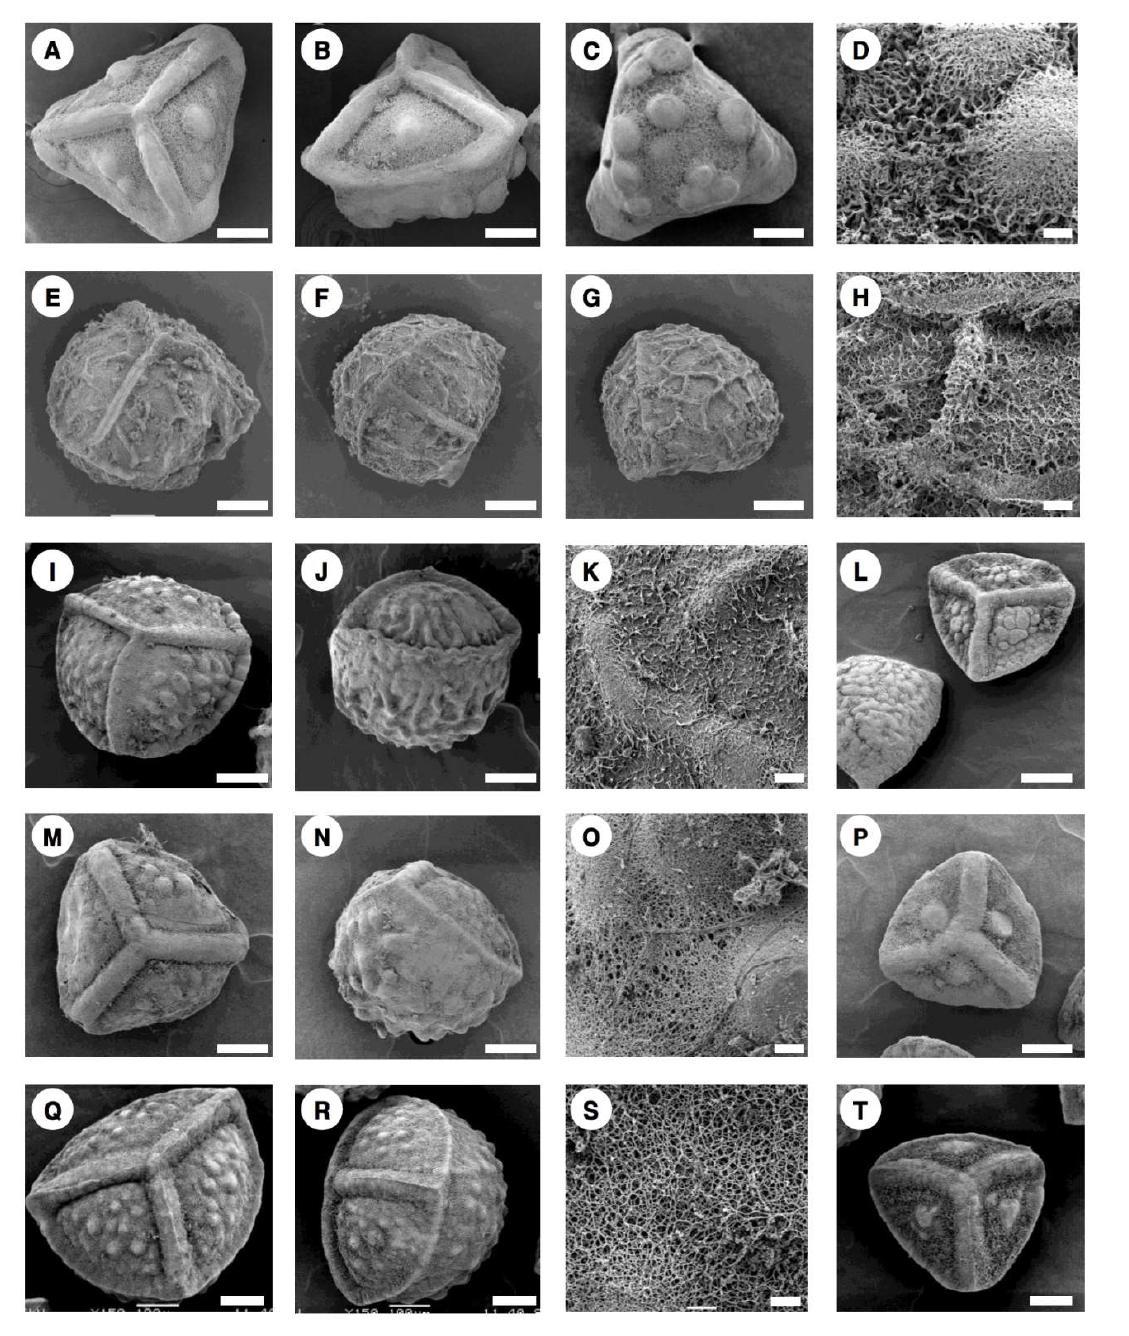 SEM micrographs of megaspore from Isoetes species. A-D. I. laosiensis. E-H. I. philippinensis. I-L. I. sp. (not identified). M-P. I. coromandelina subsp. coromandelina from India. Q-T. I. coromandelina subsp. coromandelina from Ceylon. A, E, I, M, and Q. Proximal view. B, F, J, N, and I. Lateral view. C and G. Distal view. D, H, K, O, and S. Ultra-structure of megaspore surface. L, P, and T. Small megaspore by dimorphism. Scale bars indicate 100 ㎛ except for micrographs of ultra-structure (10 ㎛ in D, H, K, O, and S), (unpublished data).